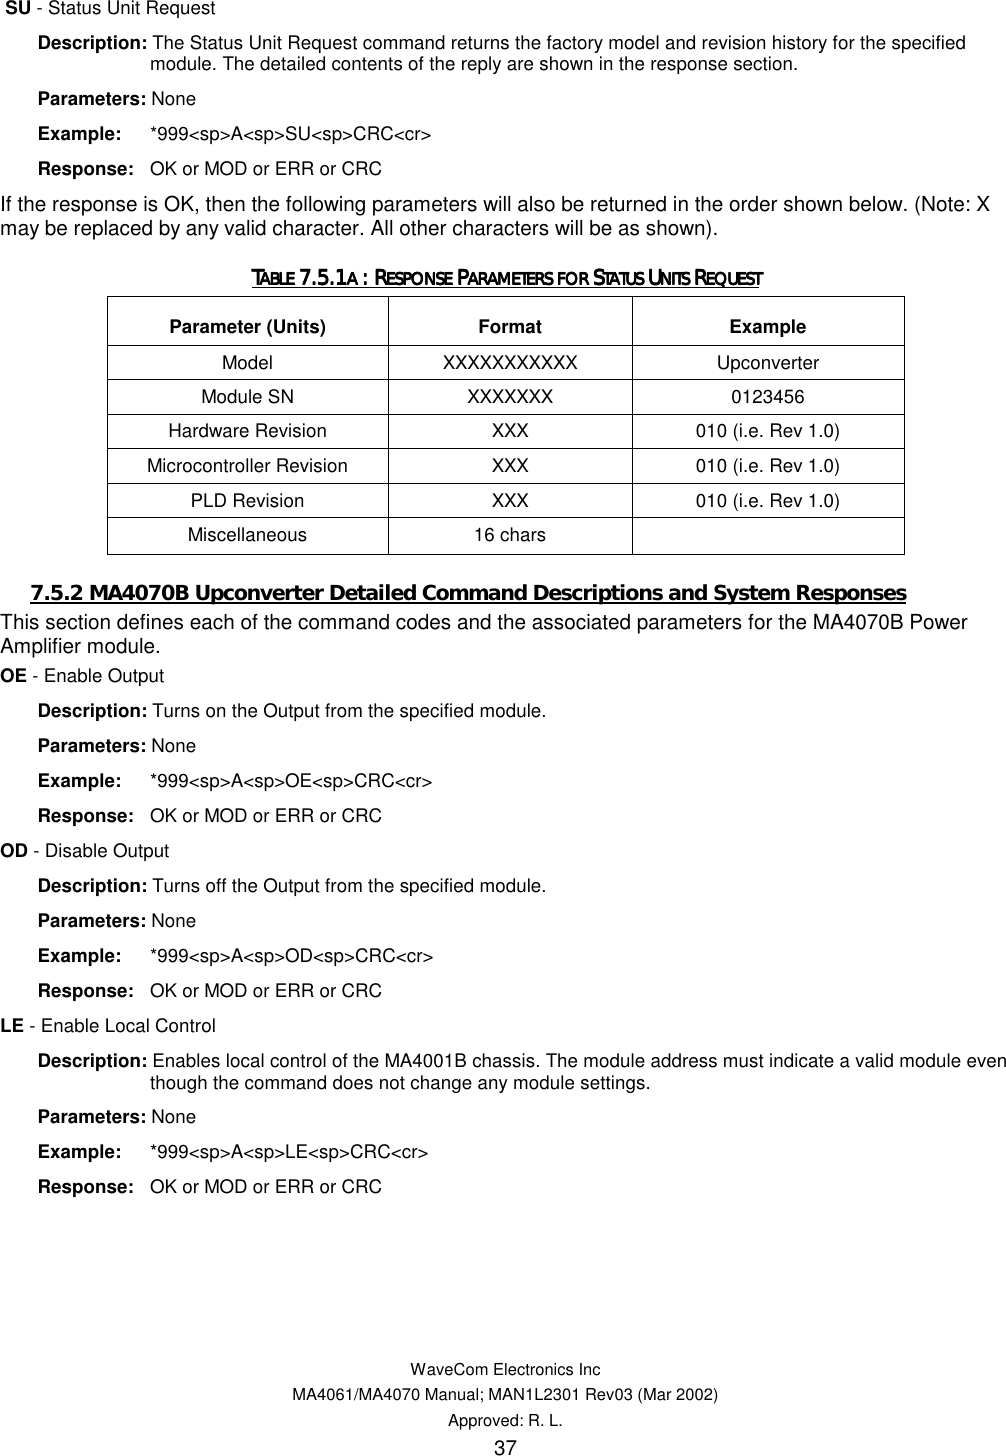   WaveCom Electronics Inc MA4061/MA4070 Manual; MAN1L2301 Rev03 (Mar 2002) Approved: R. L. 37  SU - Status Unit Request  Description: The Status Unit Request command returns the factory model and revision history for the specified module. The detailed contents of the reply are shown in the response section.  Parameters: None  Example: *999&lt;sp&gt;A&lt;sp&gt;SU&lt;sp&gt;CRC&lt;cr&gt;  Response:  OK or MOD or ERR or CRC If the response is OK, then the following parameters will also be returned in the order shown below. (Note: X may be replaced by any valid character. All other characters will be as shown). TTTTABLE ABLE ABLE ABLE 7.5.17.5.17.5.17.5.1A A A A : R: R: R: RESPONSE ESPONSE ESPONSE ESPONSE PPPPARAMETERS FOR ARAMETERS FOR ARAMETERS FOR ARAMETERS FOR SSSSTATUS TATUS TATUS TATUS UUUUNITS NITS NITS NITS RRRREQUESTEQUESTEQUESTEQUEST    Parameter (Units)  Format  Example Model  XXXXXXXXXXX Upconverter Module SN  XXXXXXX  0123456 Hardware Revision  XXX  010 (i.e. Rev 1.0) Microcontroller Revision  XXX  010 (i.e. Rev 1.0) PLD Revision  XXX  010 (i.e. Rev 1.0) Miscellaneous 16 chars   7.5.2 MA4070B Upconverter Detailed Command Descriptions and System Responses This section defines each of the command codes and the associated parameters for the MA4070B Power Amplifier module. OE - Enable Output  Description: Turns on the Output from the specified module.  Parameters: None  Example: *999&lt;sp&gt;A&lt;sp&gt;OE&lt;sp&gt;CRC&lt;cr&gt;  Response:  OK or MOD or ERR or CRC OD - Disable Output  Description: Turns off the Output from the specified module.  Parameters: None  Example: *999&lt;sp&gt;A&lt;sp&gt;OD&lt;sp&gt;CRC&lt;cr&gt;  Response:  OK or MOD or ERR or CRC LE - Enable Local Control  Description: Enables local control of the MA4001B chassis. The module address must indicate a valid module even though the command does not change any module settings.  Parameters: None  Example: *999&lt;sp&gt;A&lt;sp&gt;LE&lt;sp&gt;CRC&lt;cr&gt;  Response:  OK or MOD or ERR or CRC 